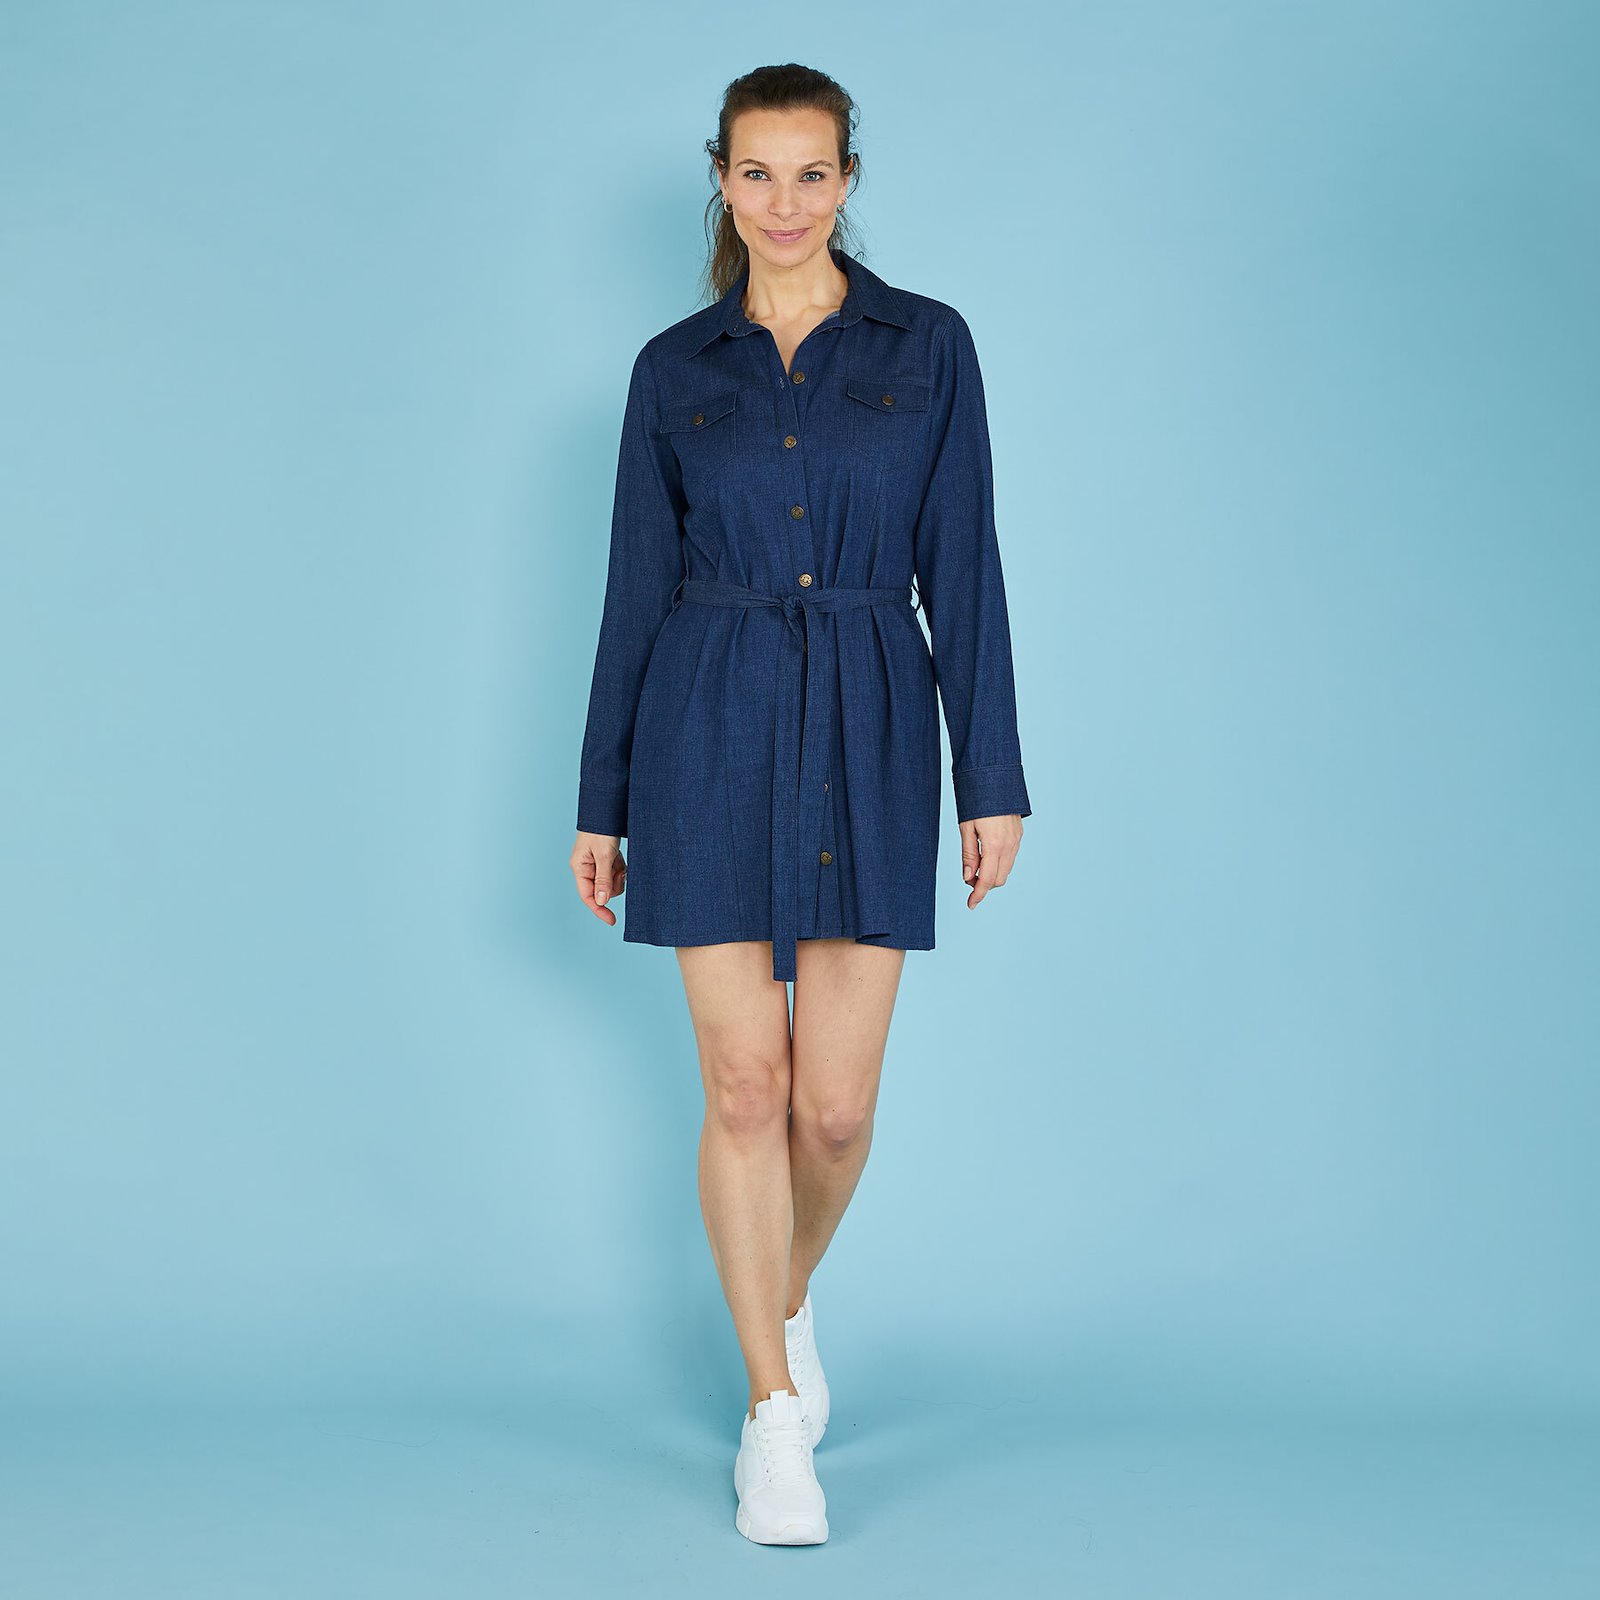 Fitted shirt dress with tie belt, 46/18 p23176000_p23176001_p23176002_p23176003_p23176004_pack_d